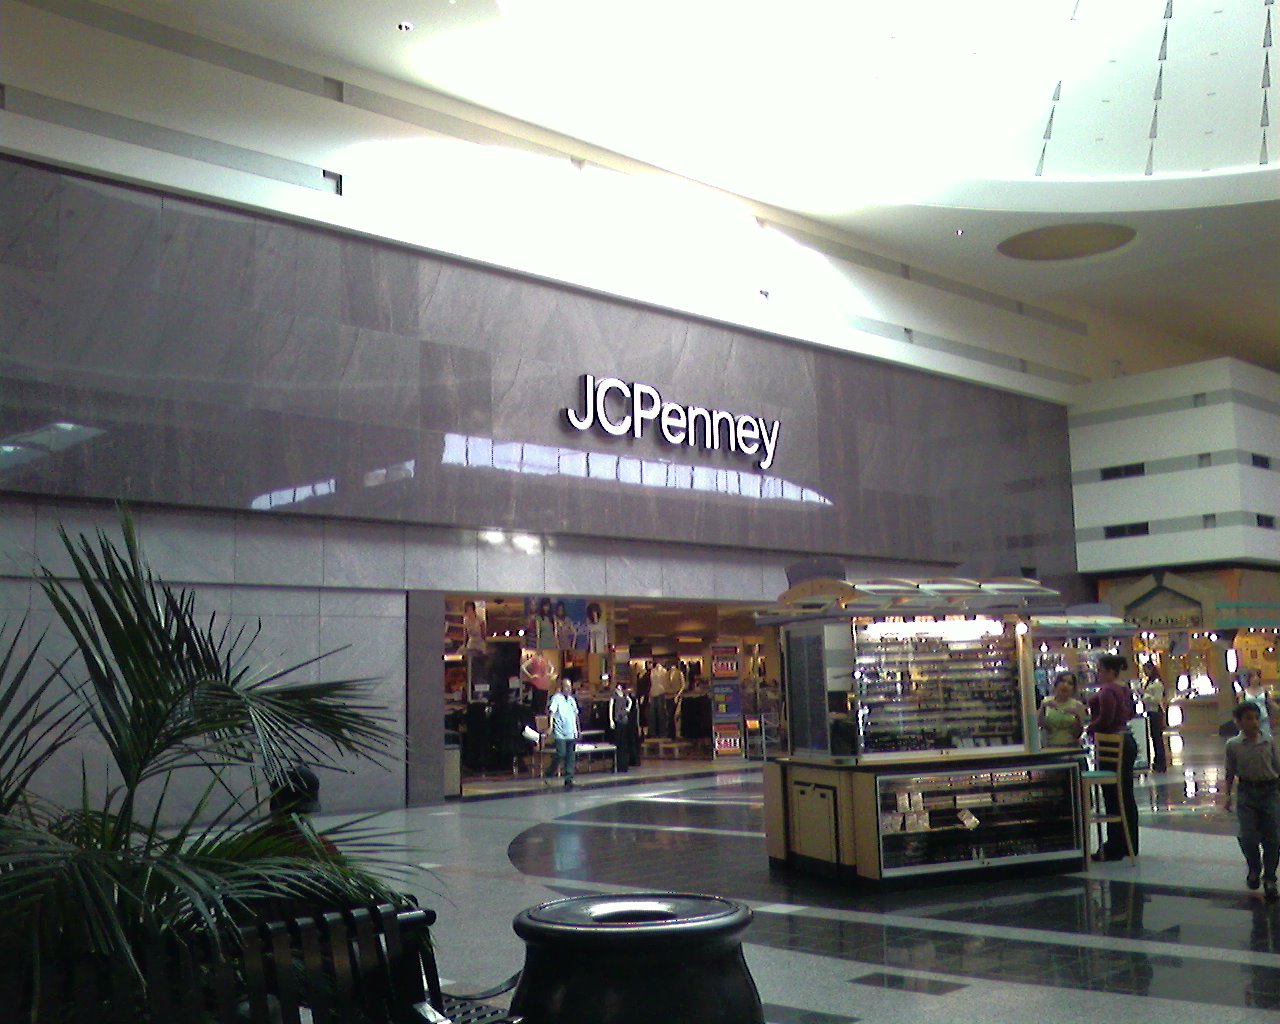 JCPenney store at Boulevard Mall in Las Vegas, NV